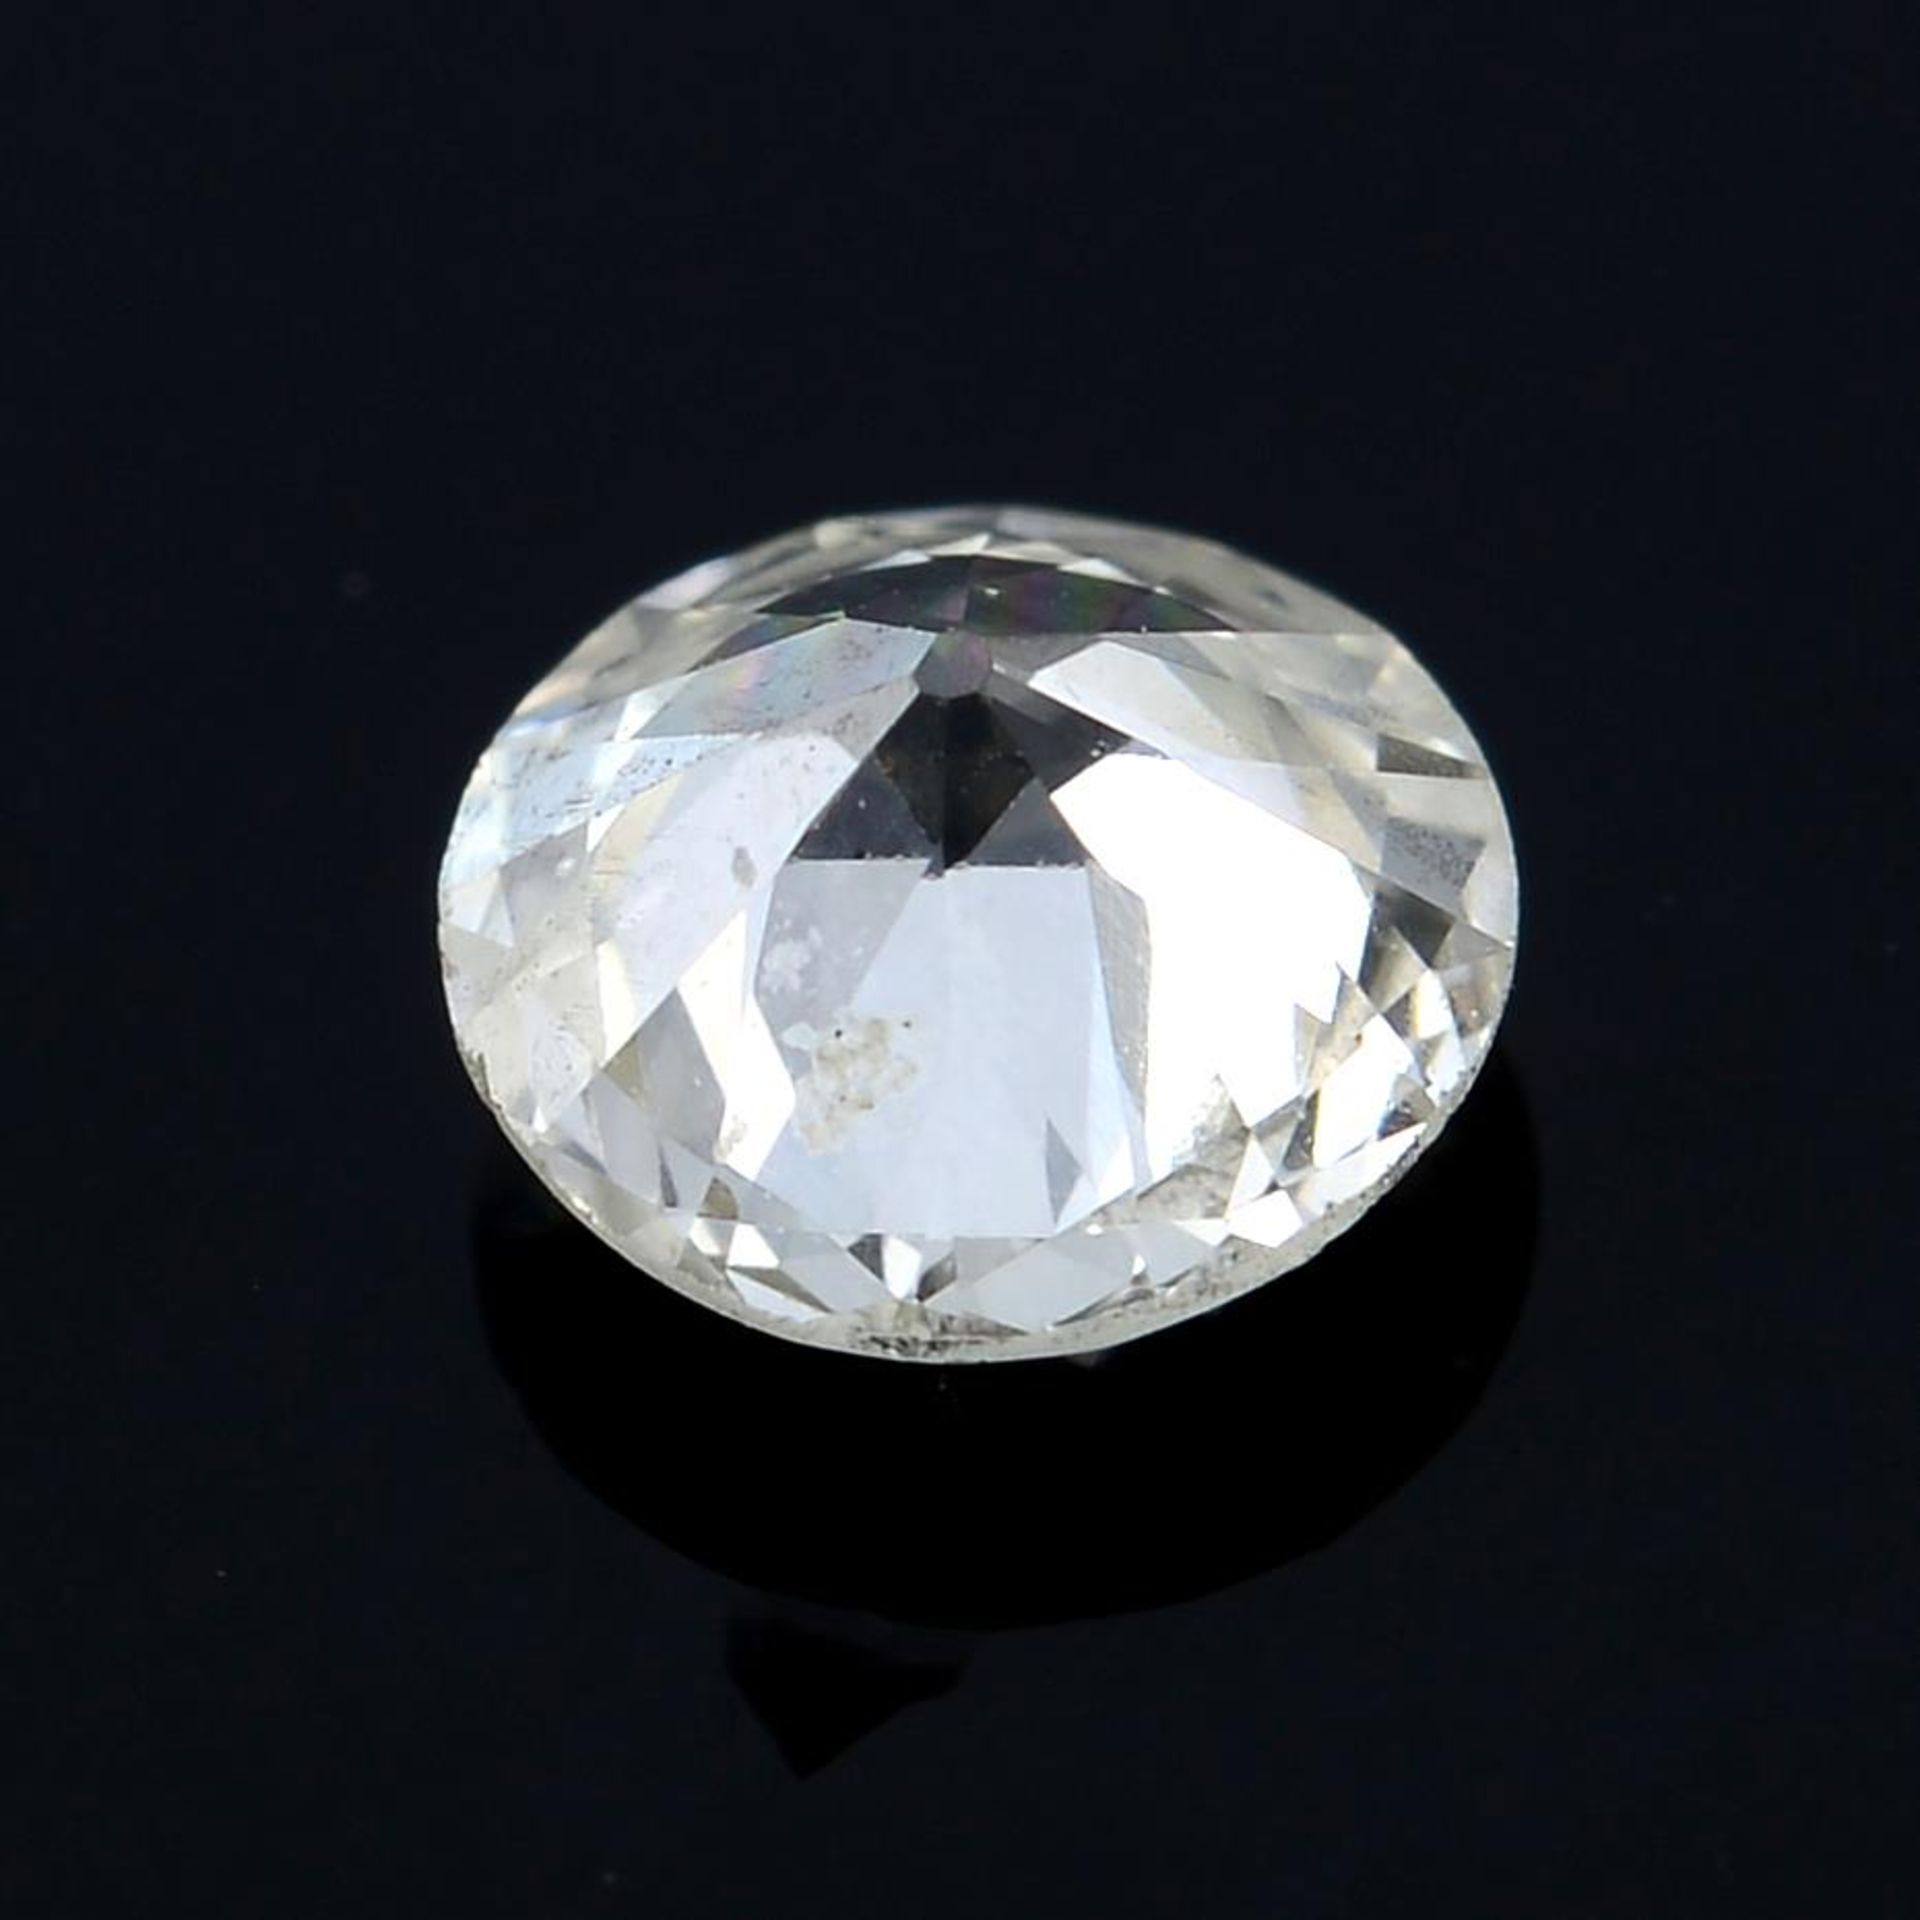 A brilliant cut diamond weighing 0.26ct. - Image 2 of 2